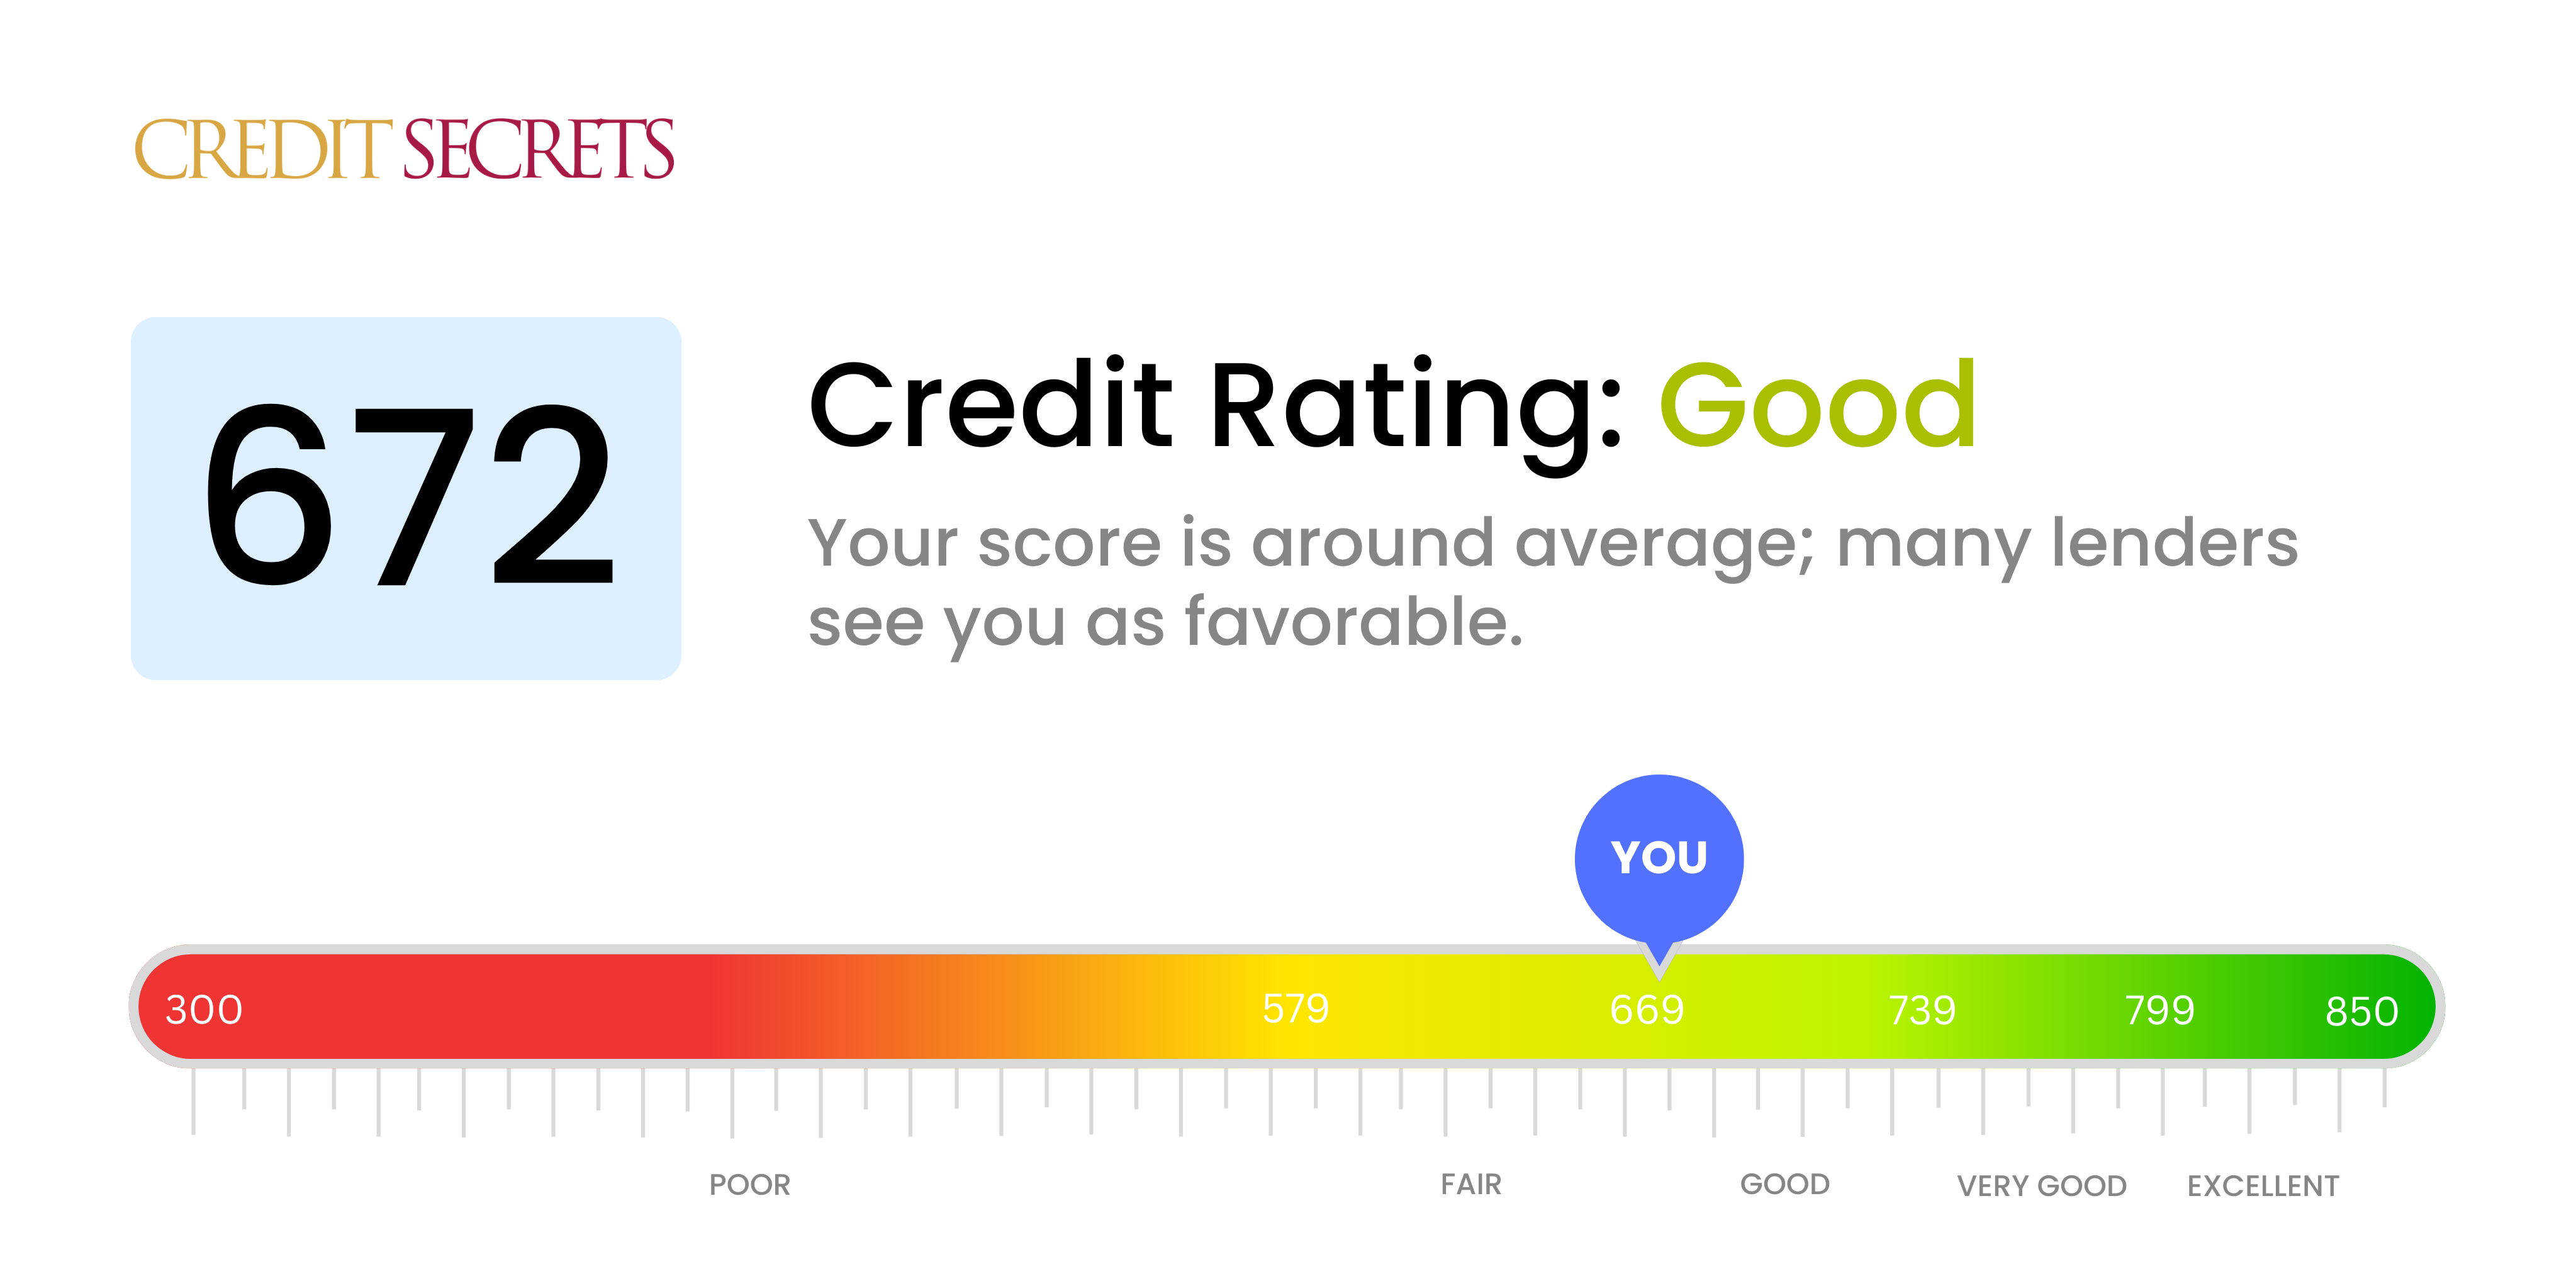 Is 672 a good credit score?